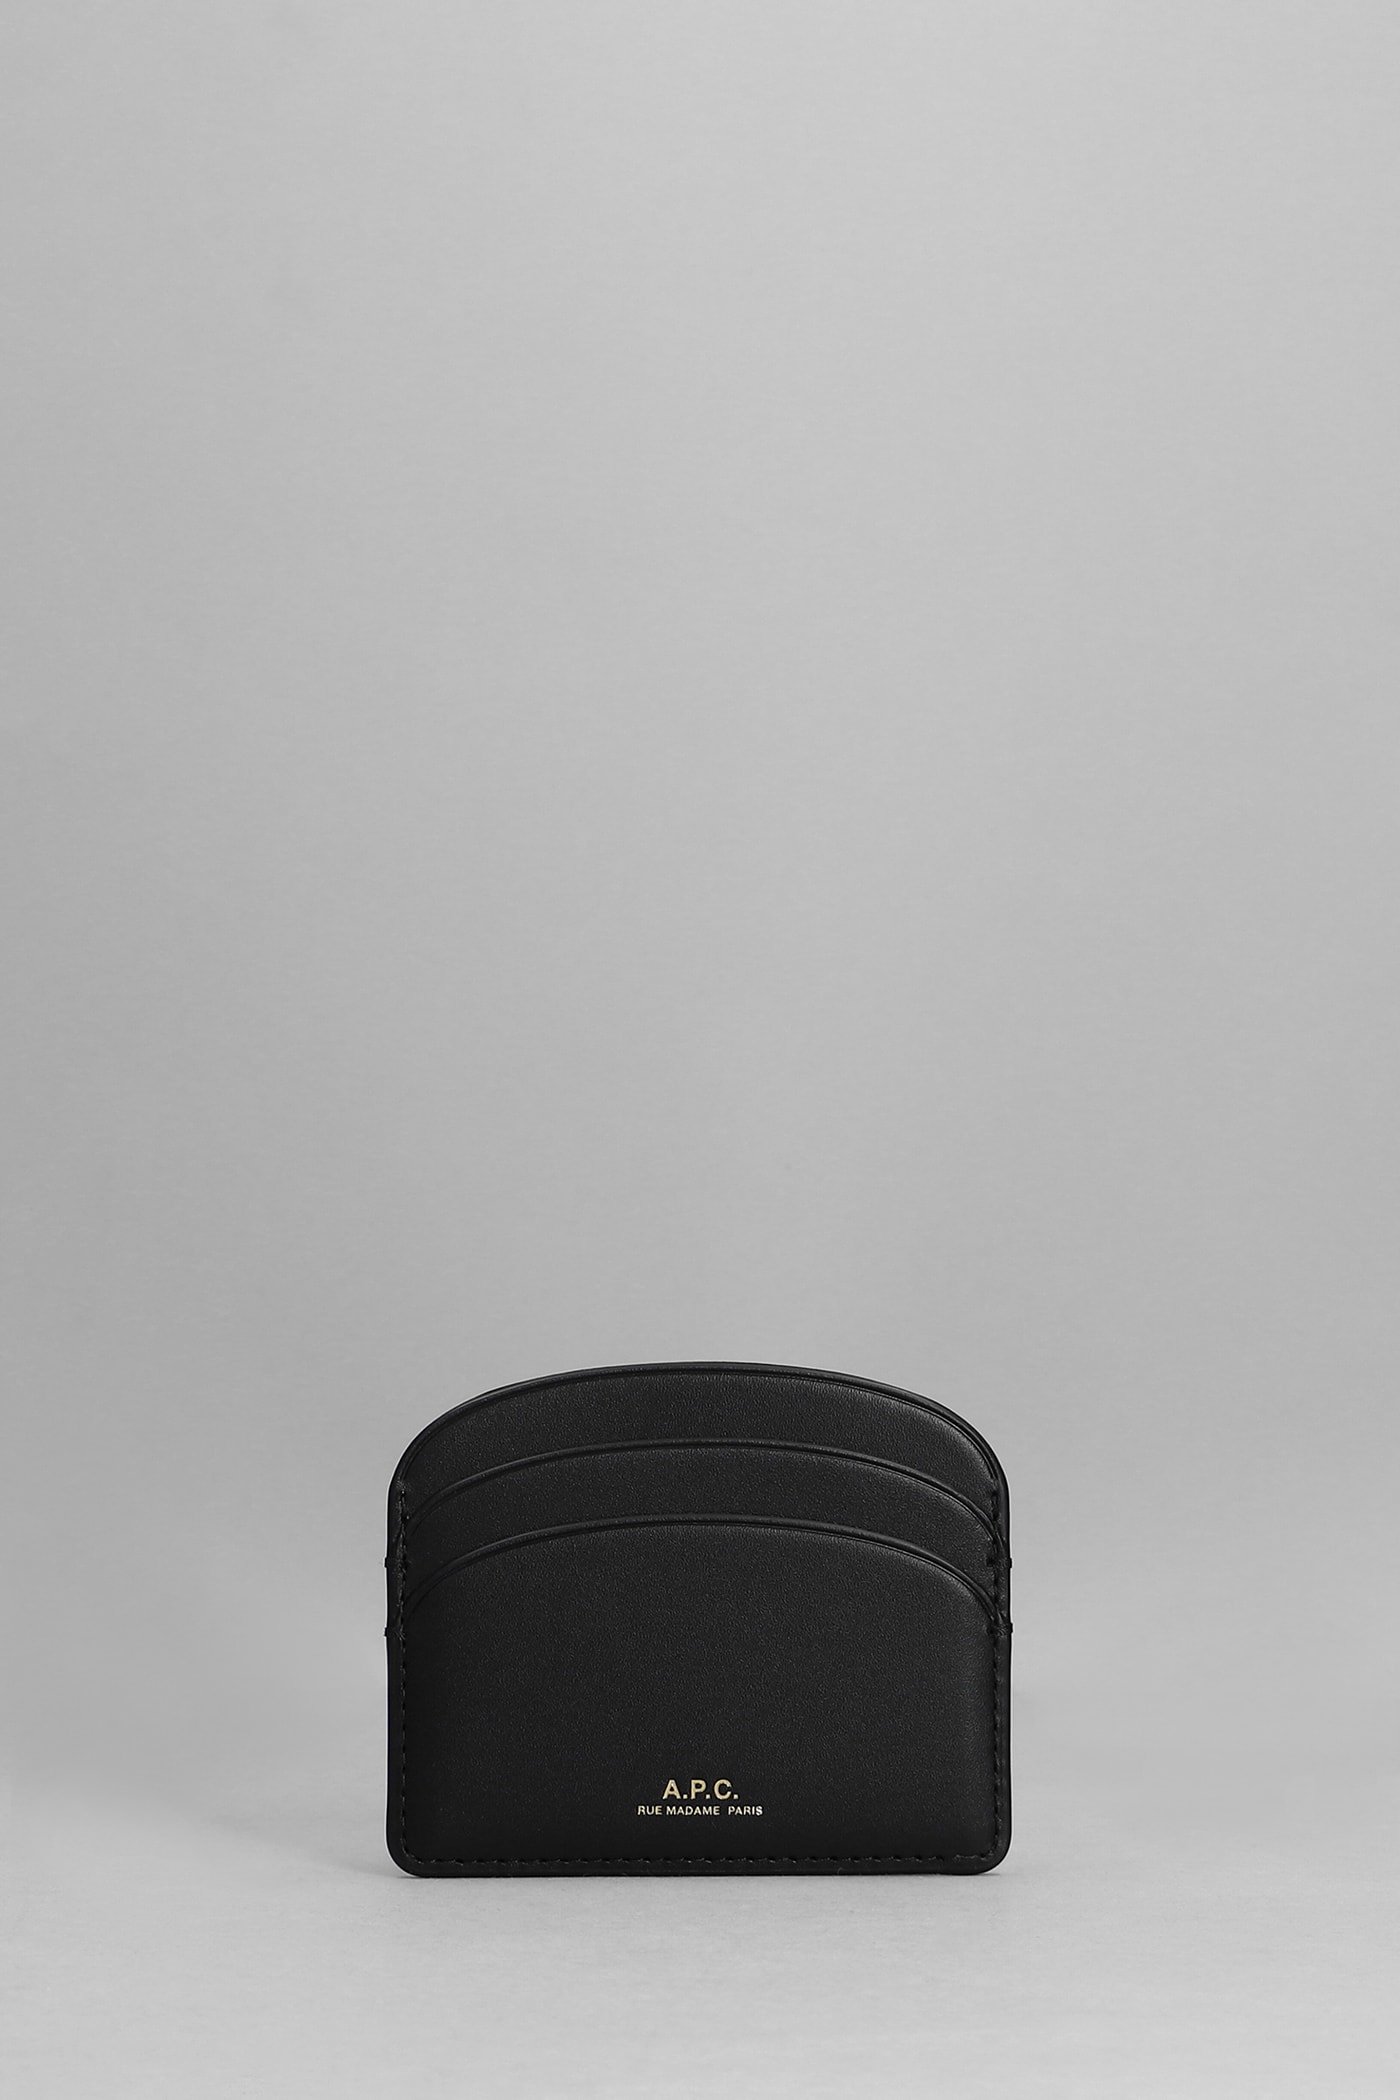 A.P.C. Demi Lune Wallet In Black Leather